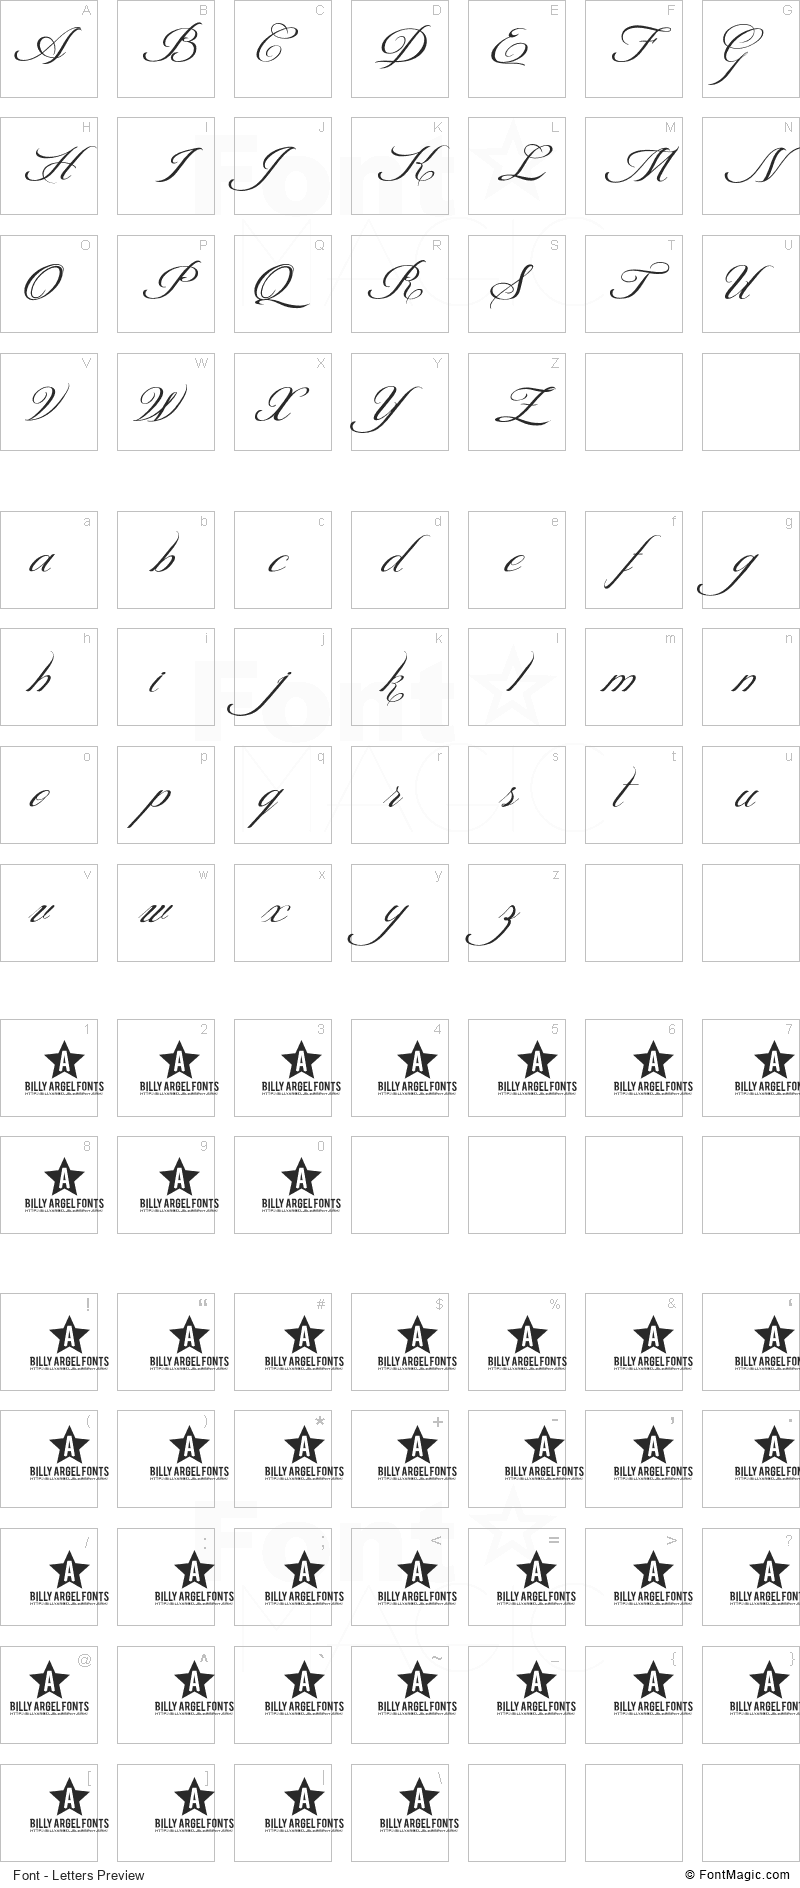 Shit Happens Font - All Latters Preview Chart